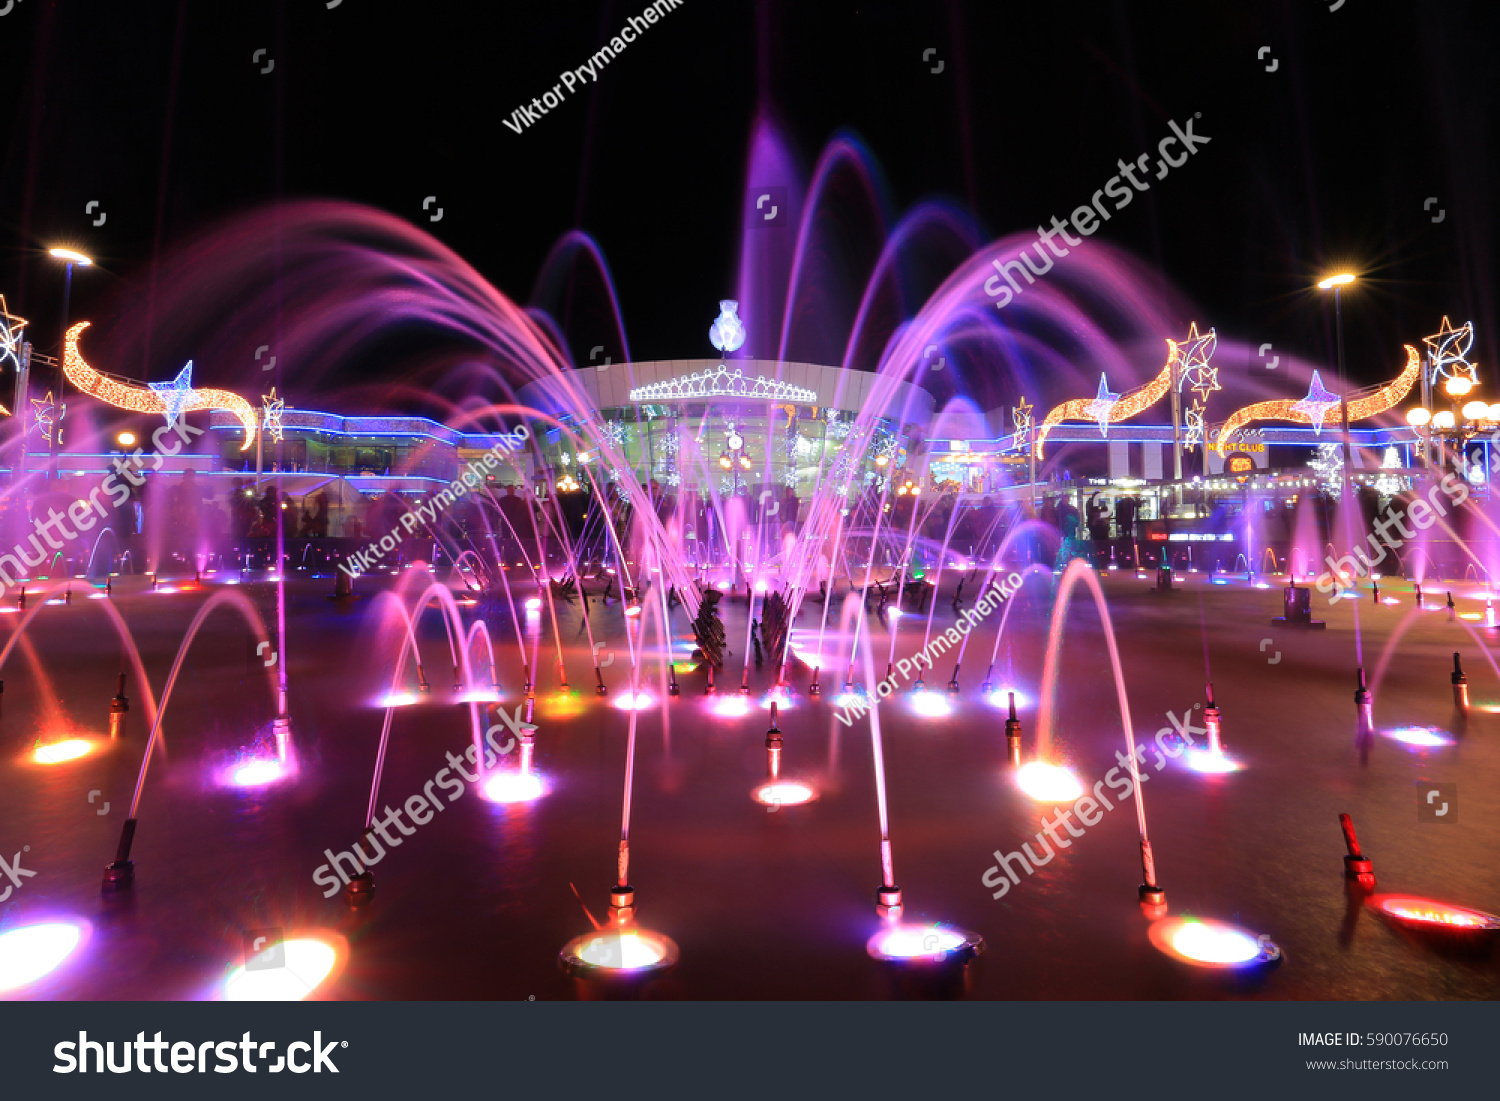 Colorful fountain at night in Soho square in Sharm El Sheikh, Egypt #590076650